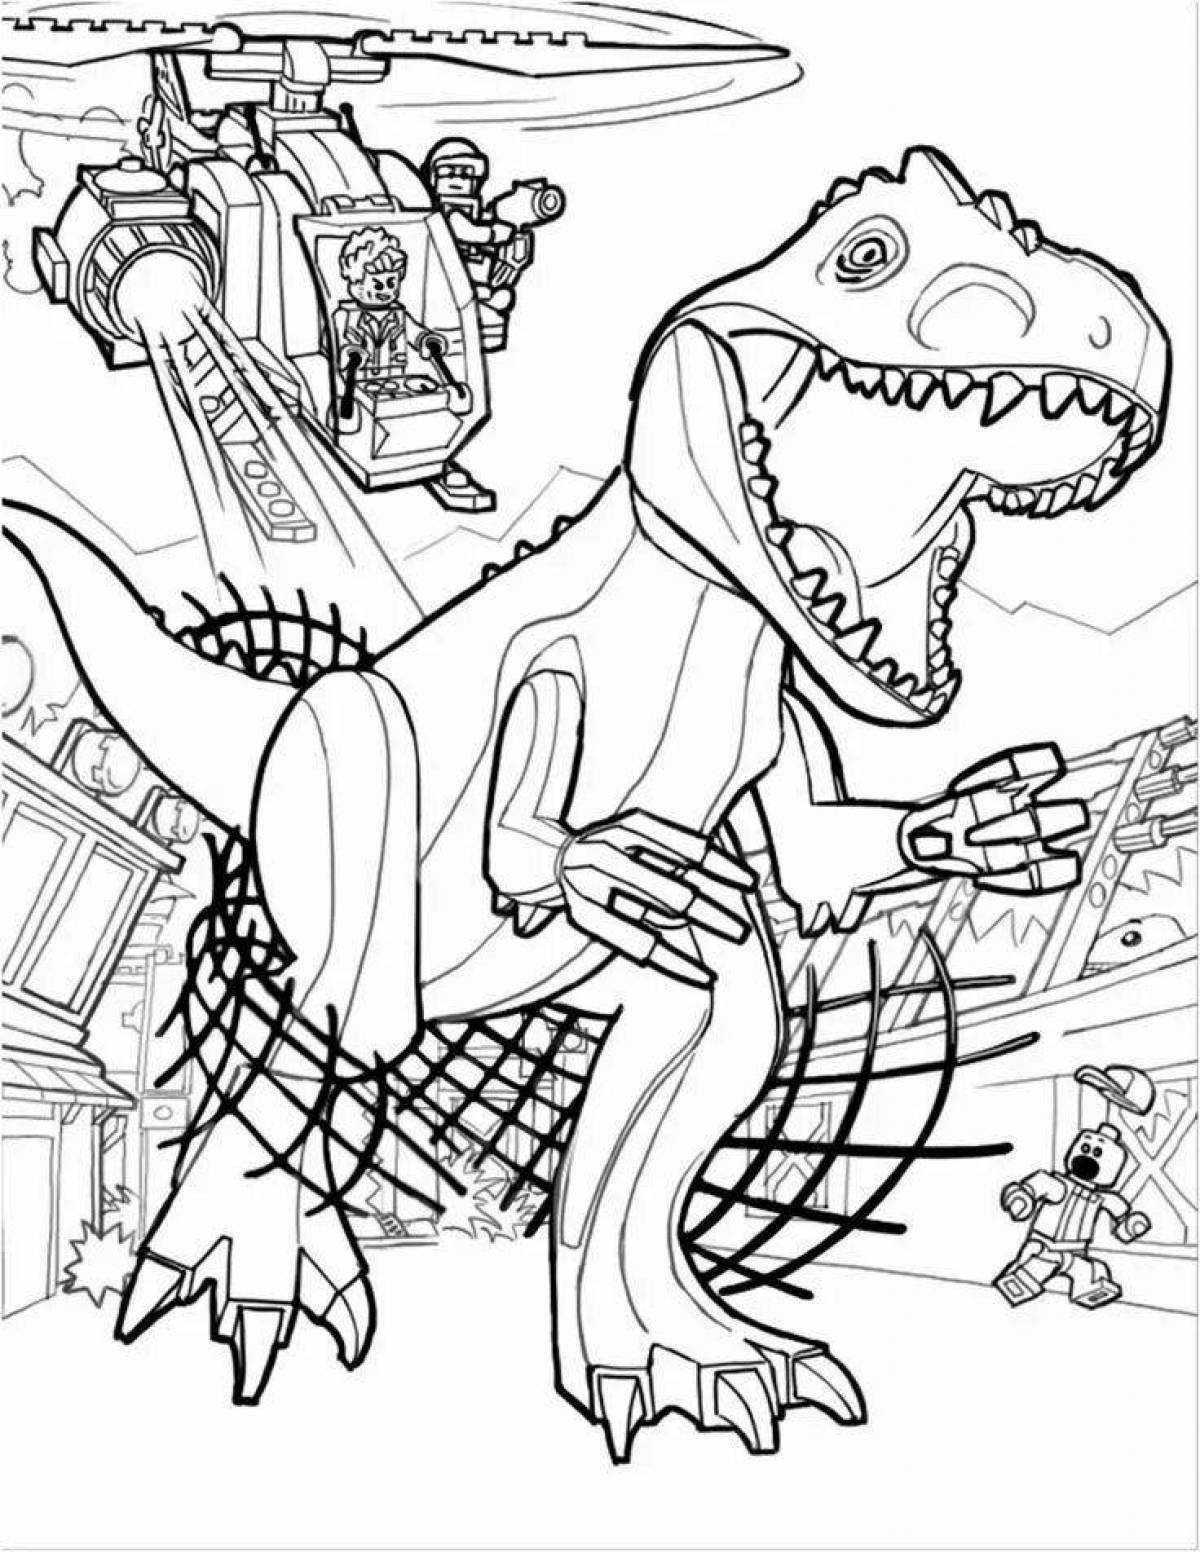 Gorgeous jurassic park lego coloring book